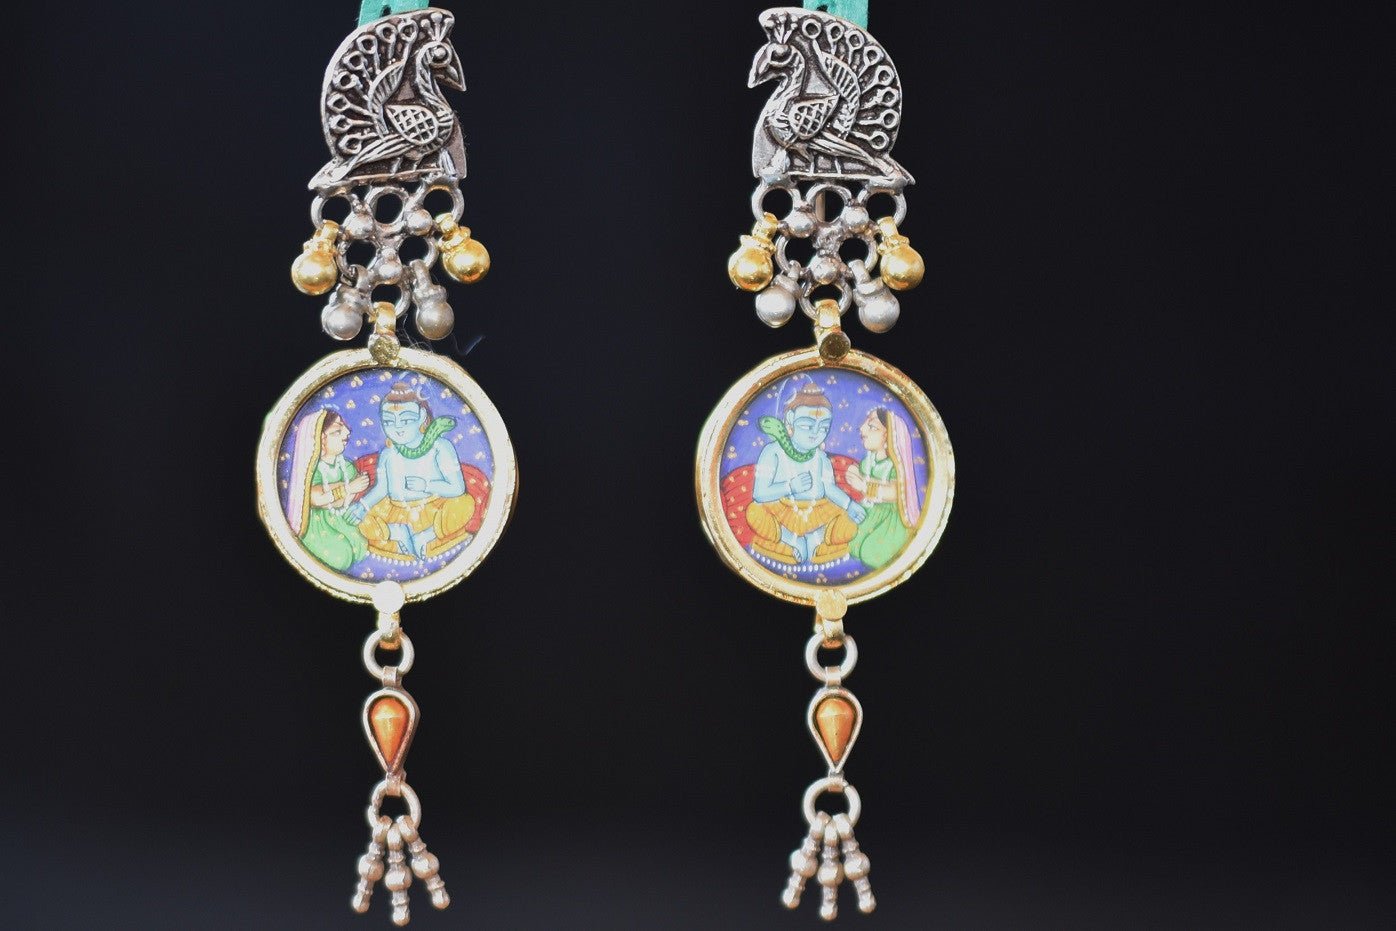 20a486-silver-gold-plated-amrapali-earrings-A